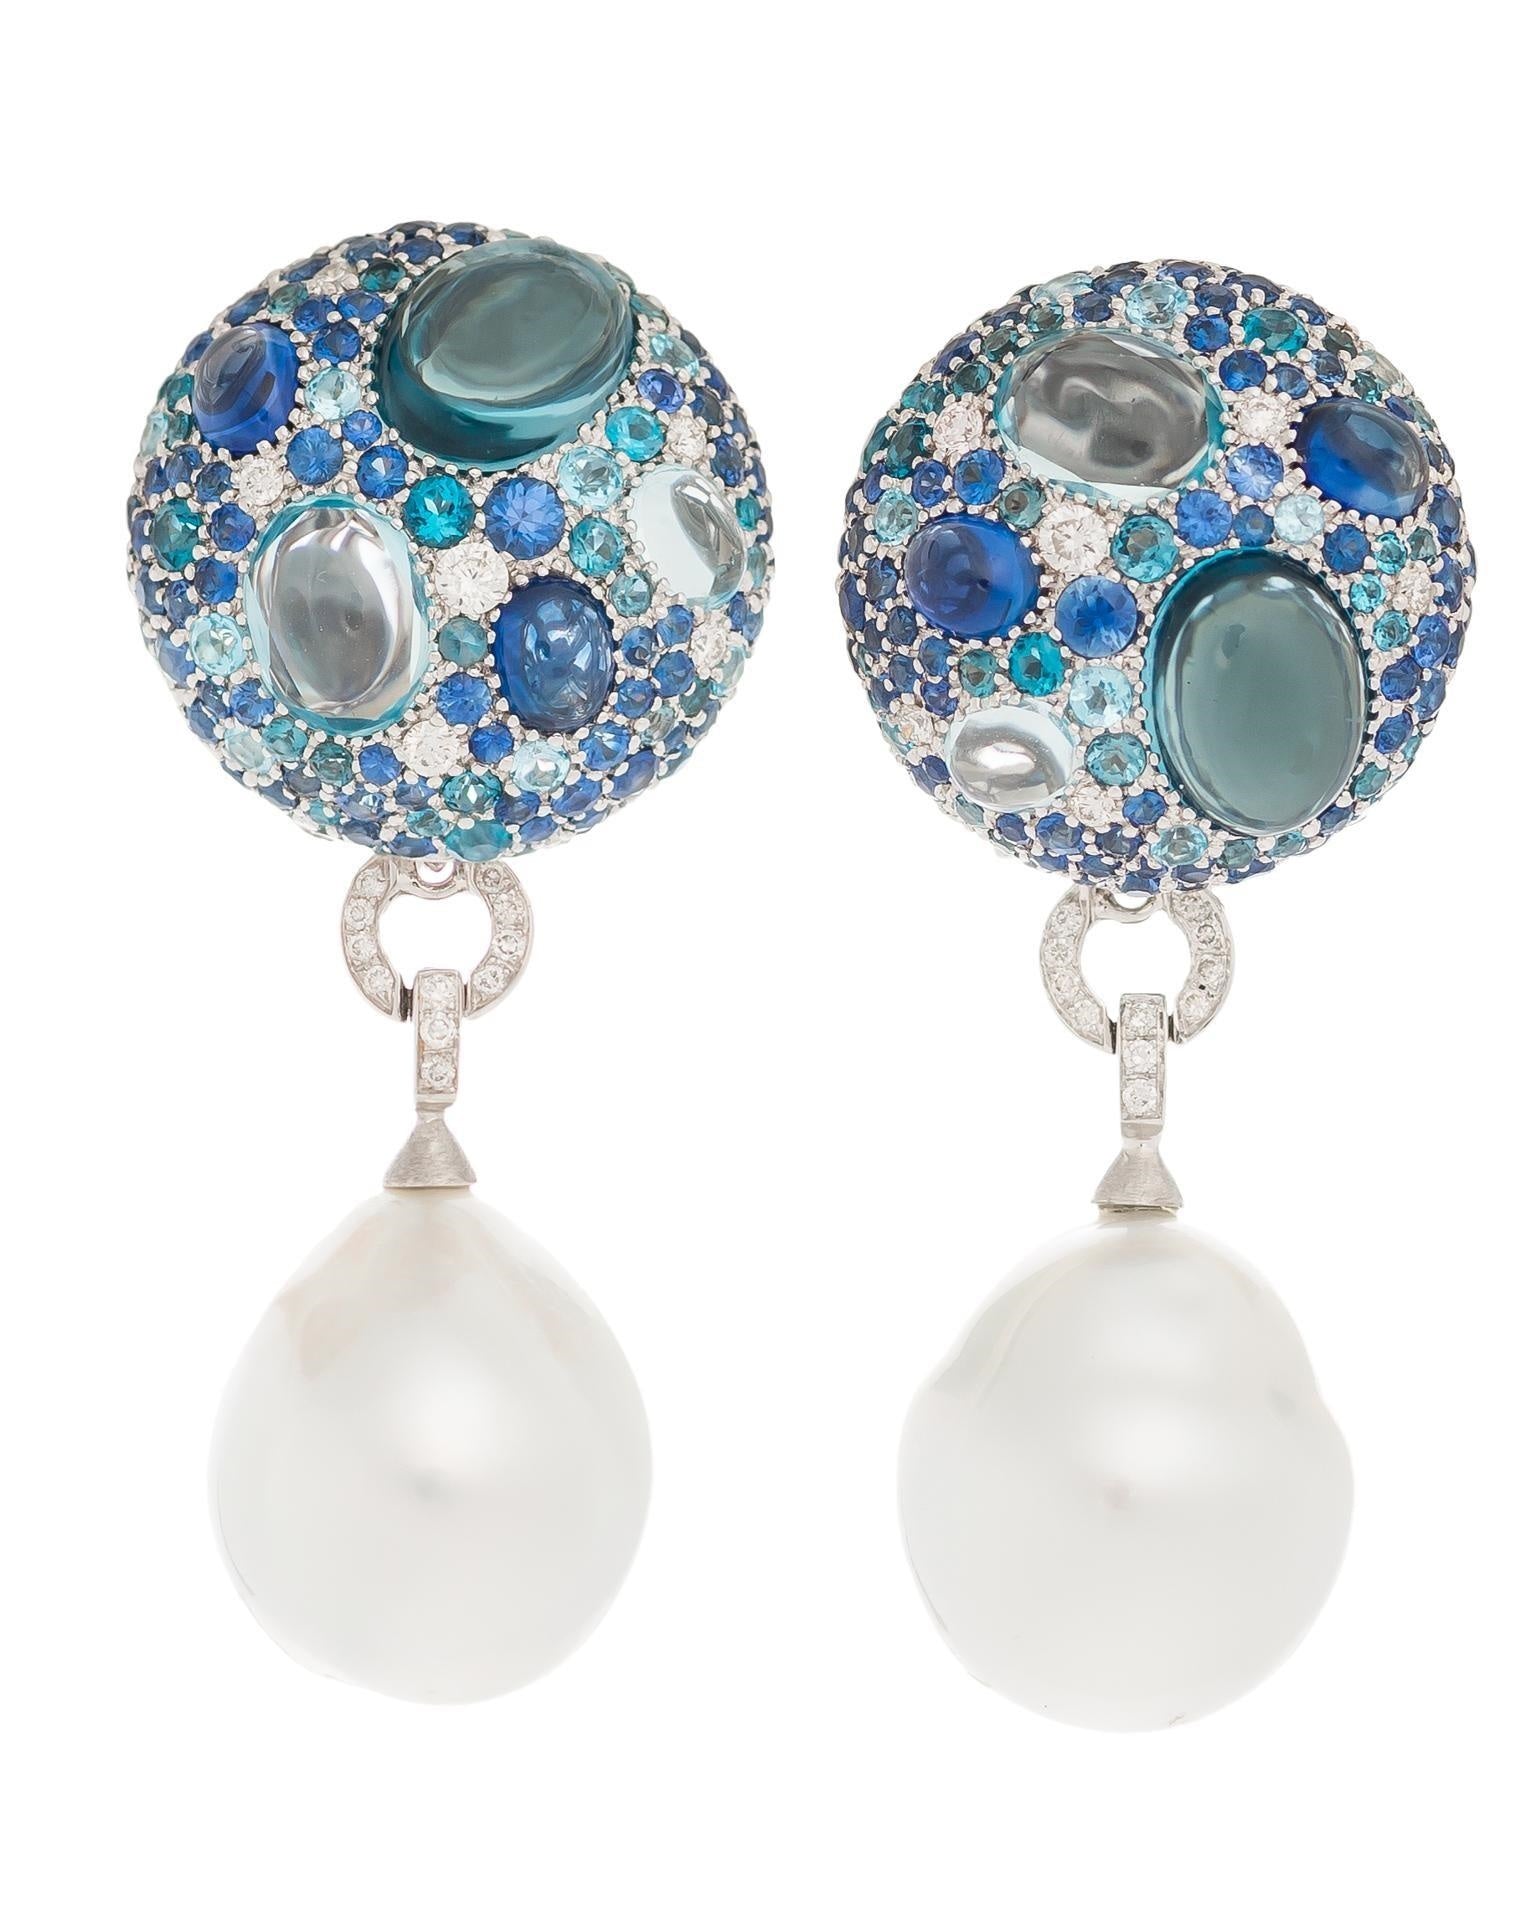 South Sea Pearl blue cookie drop earrings with sapphires, blue topaz and diamond tops crafted in 18 karat white gold